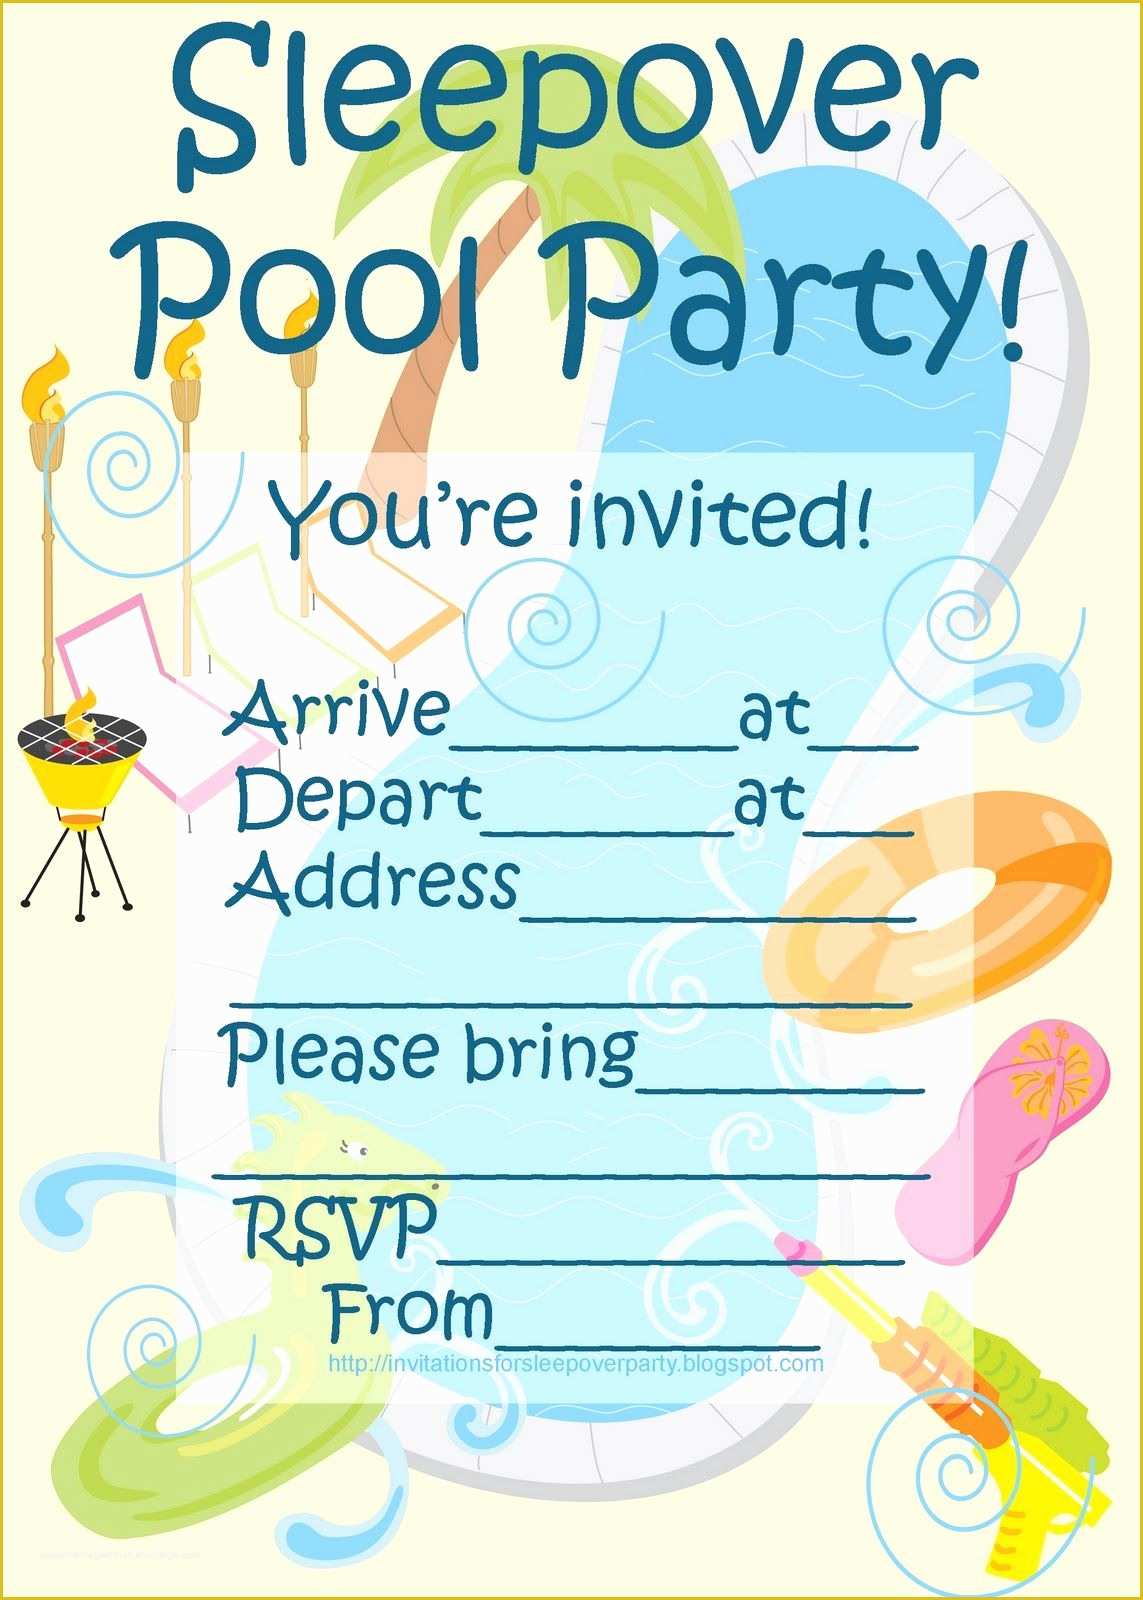 Free Printable Slumber Party Invitations Templates Of Invitations for Sleepover Party Sleepover Pool Party